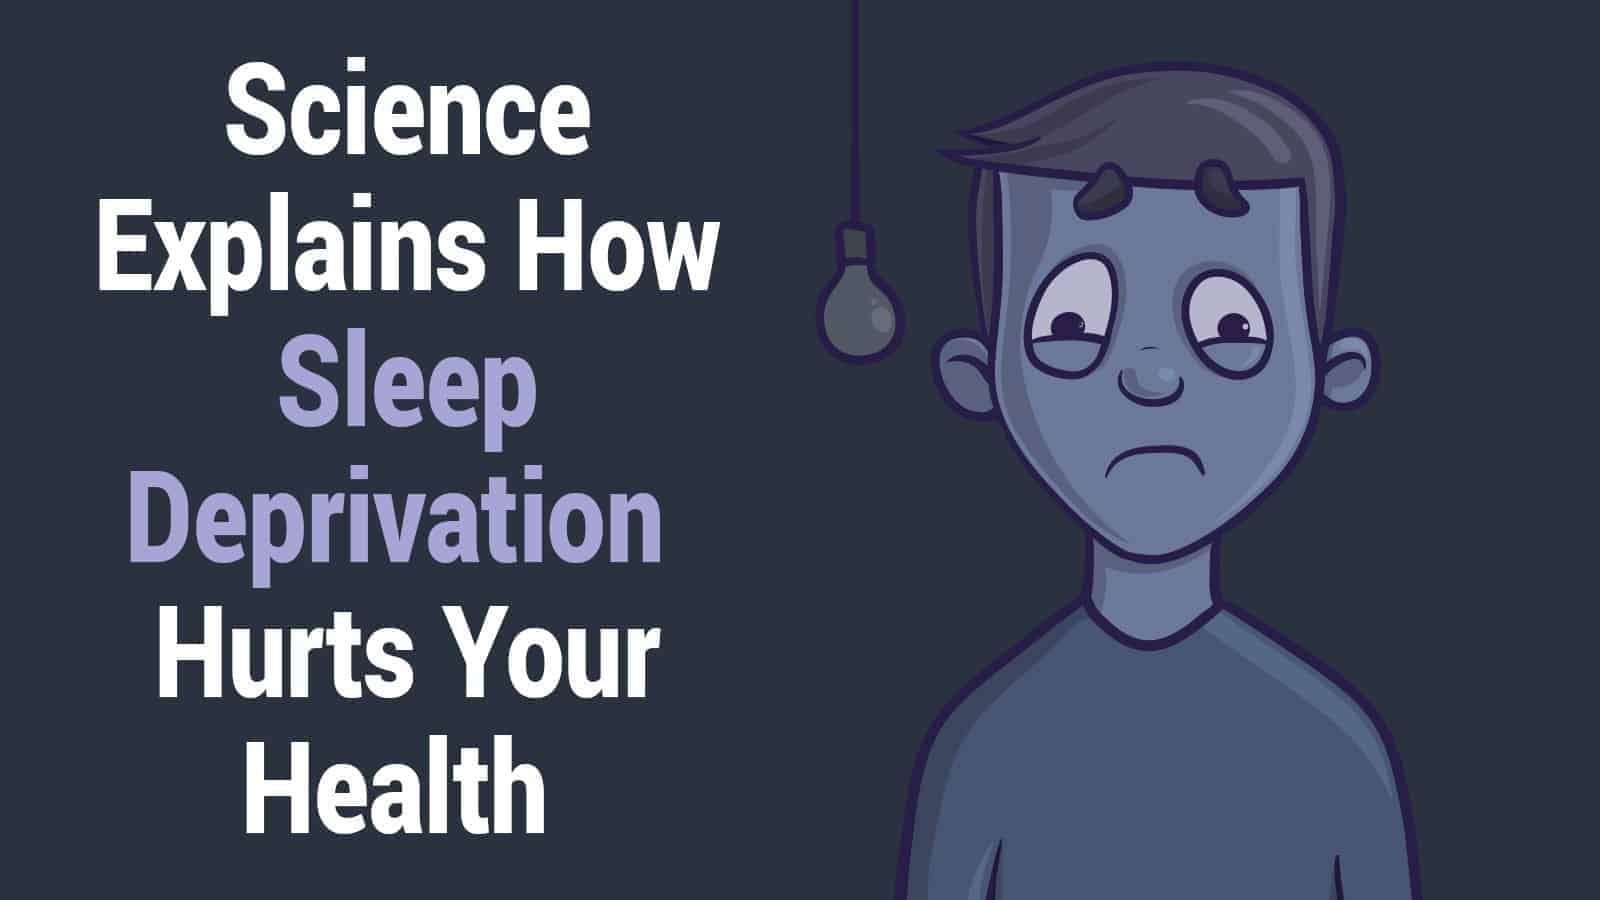 Science Explains How Sleep Deprivation Hurts Your Health